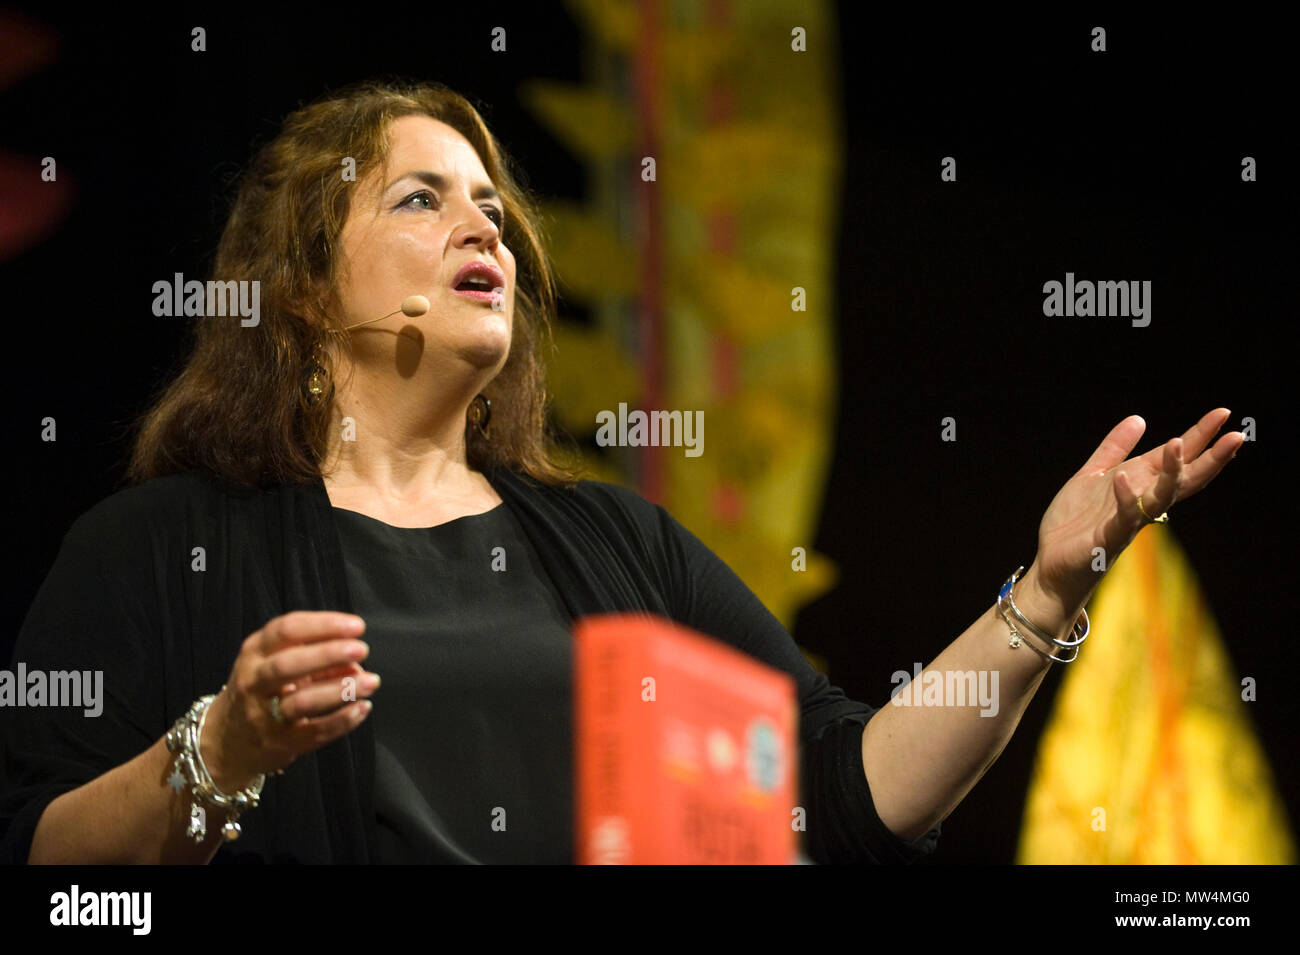 Ruth Jones actress scriptwriter producer speaking on stage in the Tata Tent at Hay Festival 2018 Hay-on-Wye Powys Wales UK Stock Photo